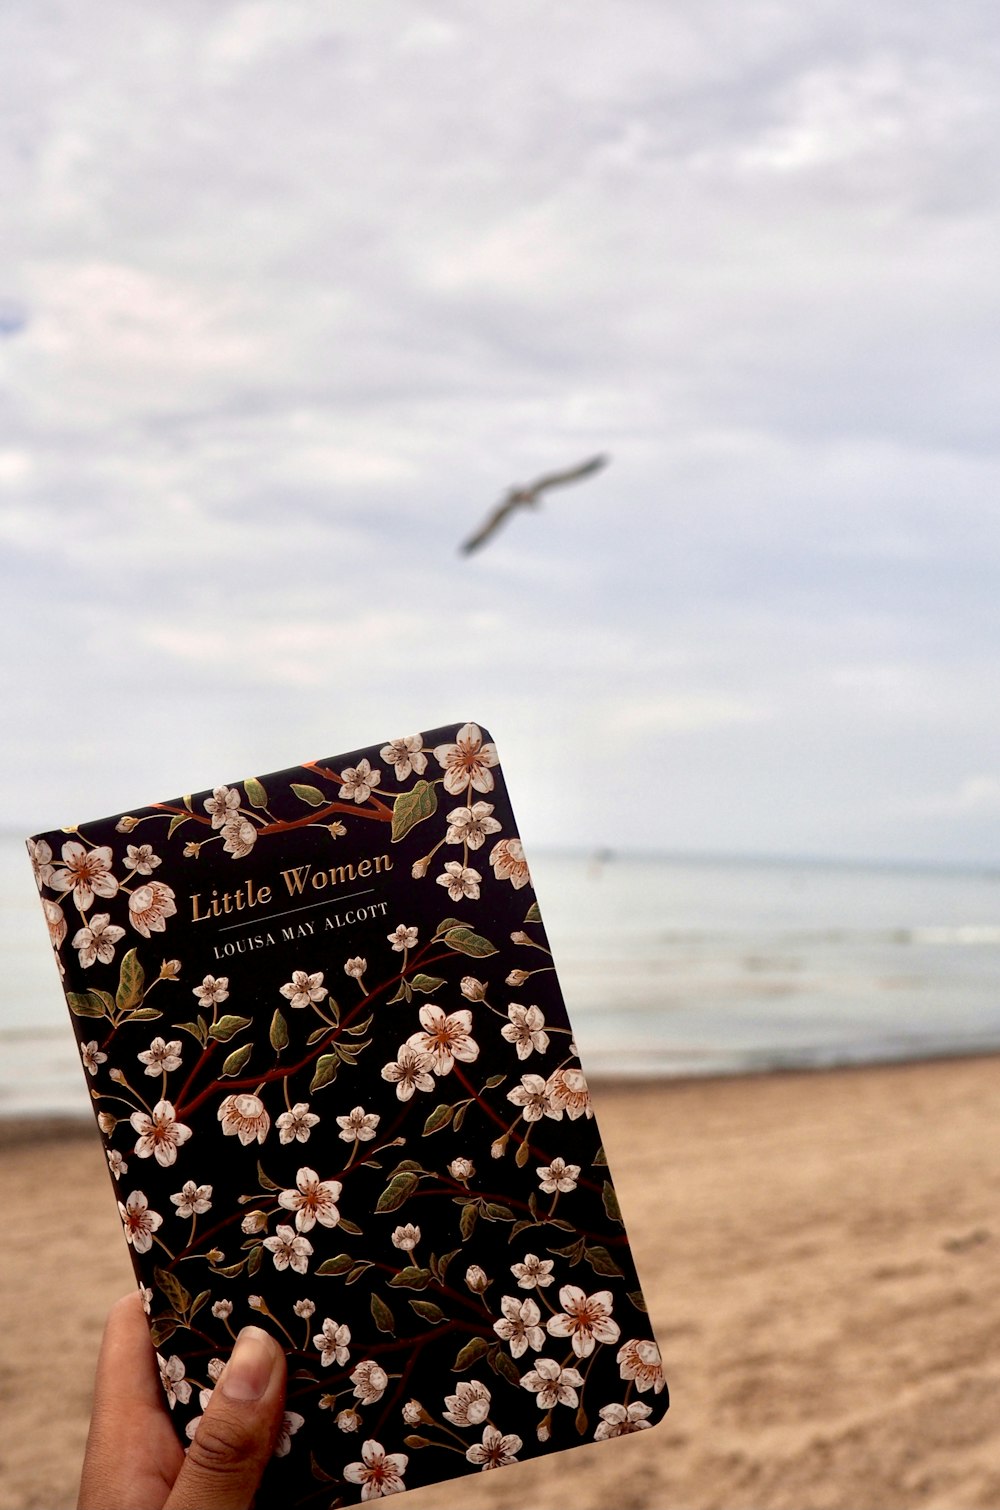 black and white floral book on beach shore during daytime